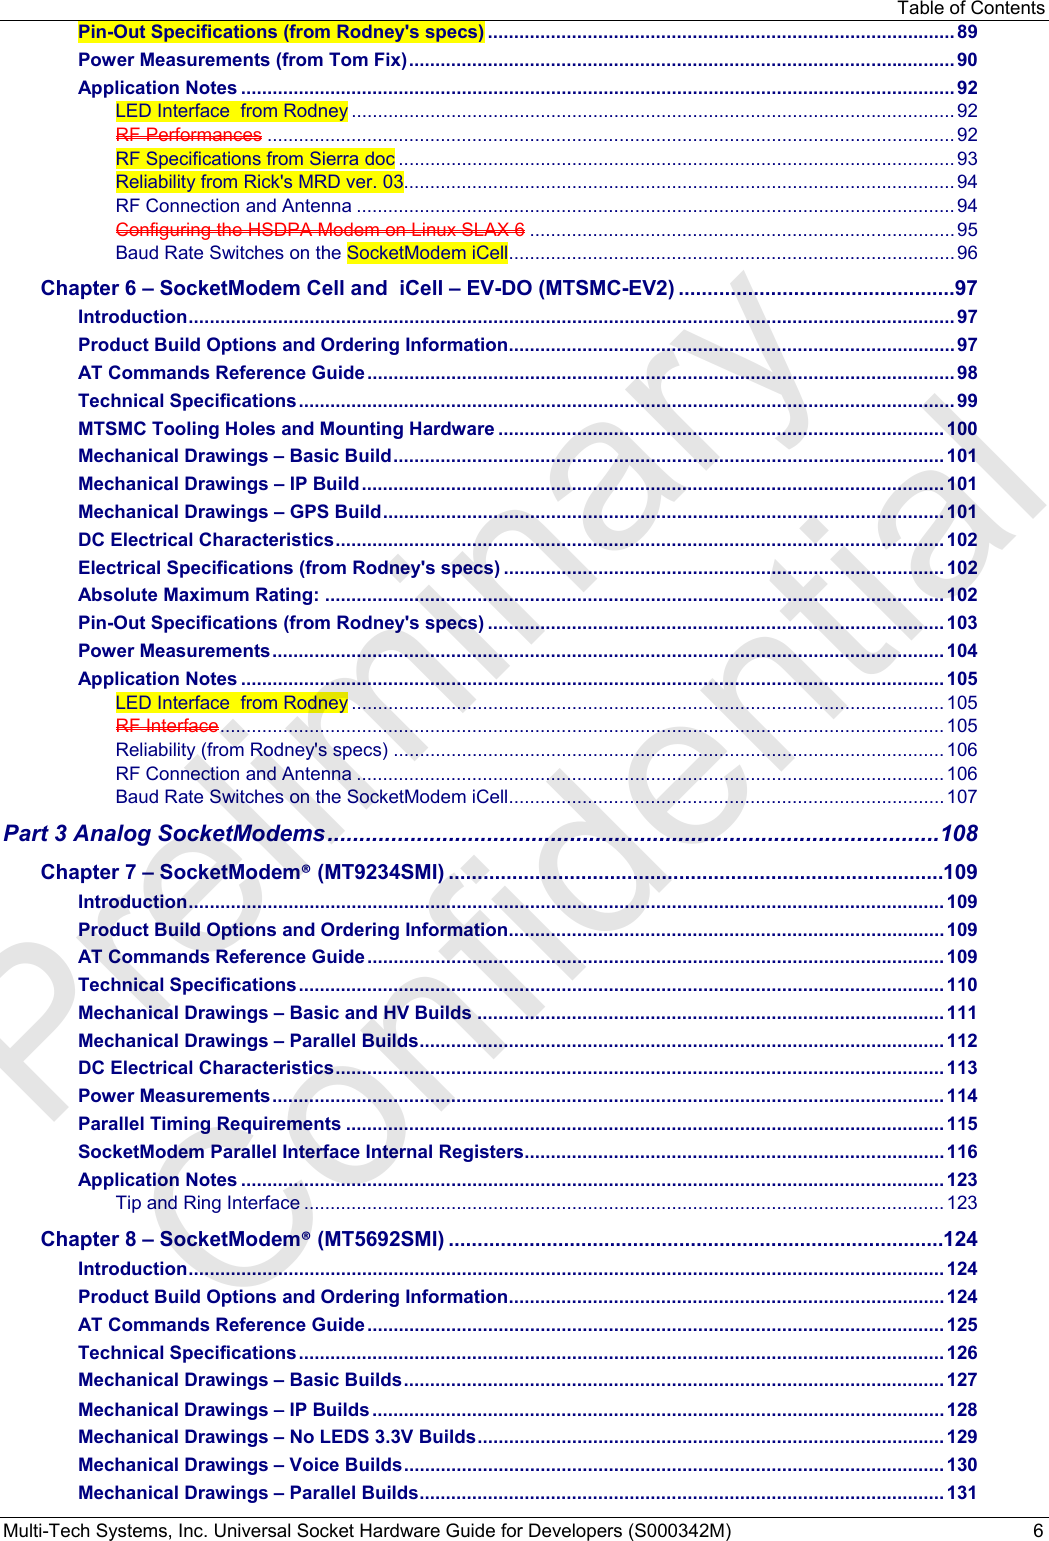 Table of Contents Multi-Tech Systems, Inc. Universal Socket Hardware Guide for Developers (S000342M)  6 Pin-Out Specifications (from Rodney&apos;s specs) ......................................................................................... 89 Power Measurements (from Tom Fix) ........................................................................................................ 90 Application Notes ........................................................................................................................................ 92 LED Interface  from Rodney ................................................................................................................... 92 RF Performances ................................................................................................................................... 92 RF Specifications from Sierra doc .......................................................................................................... 93 Reliability from Rick&apos;s MRD ver. 03......................................................................................................... 94 RF Connection and Antenna .................................................................................................................. 94 Configuring the HSDPA Modem on Linux SLAX 6 ................................................................................. 95 Baud Rate Switches on the SocketModem iCell ..................................................................................... 96 Chapter 6 – SocketModem Cell and  iCell – EV-DO (MTSMC-EV2) ................................................ 97 Introduction .................................................................................................................................................. 97 Product Build Options and Ordering Information ..................................................................................... 97 AT Commands Reference Guide ................................................................................................................ 98 Technical Specifications ............................................................................................................................. 99 MTSMC Tooling Holes and Mounting Hardware ..................................................................................... 100 Mechanical Drawings – Basic Build ......................................................................................................... 101 Mechanical Drawings – IP Build ............................................................................................................... 101 Mechanical Drawings – GPS Build ........................................................................................................... 101 DC Electrical Characteristics .................................................................................................................... 102 Electrical Specifications (from Rodney&apos;s specs) .................................................................................... 102 Absolute Maximum Rating: ...................................................................................................................... 102 Pin-Out Specifications (from Rodney&apos;s specs) ....................................................................................... 103 Power Measurements ................................................................................................................................ 104 Application Notes ...................................................................................................................................... 105 LED Interface  from Rodney ................................................................................................................. 105 RF Interface .......................................................................................................................................... 105 Reliability (from Rodney&apos;s specs) ......................................................................................................... 106 RF Connection and Antenna ................................................................................................................ 106 Baud Rate Switches on the SocketModem iCell ................................................................................... 107 Part 3 Analog SocketModems ................................................................................................ 108 Chapter 7 – SocketModem® (MT9234SMI) ......................................................................................109 Introduction ................................................................................................................................................ 109 Product Build Options and Ordering Information ................................................................................... 109 AT Commands Reference Guide .............................................................................................................. 109 Technical Specifications ........................................................................................................................... 110 Mechanical Drawings – Basic and HV Builds ......................................................................................... 111 Mechanical Drawings – Parallel Builds .................................................................................................... 112 DC Electrical Characteristics .................................................................................................................... 113 Power Measurements ................................................................................................................................ 114 Parallel Timing Requirements .................................................................................................................. 115 SocketModem Parallel Interface Internal Registers ................................................................................ 116 Application Notes ...................................................................................................................................... 123 Tip and Ring Interface .......................................................................................................................... 123 Chapter 8 – SocketModem® (MT5692SMI) ......................................................................................124 Introduction ................................................................................................................................................ 124 Product Build Options and Ordering Information ................................................................................... 124 AT Commands Reference Guide .............................................................................................................. 125 Technical Specifications ........................................................................................................................... 126 Mechanical Drawings – Basic Builds ....................................................................................................... 127 Mechanical Drawings − IP Builds ............................................................................................................. 128 Mechanical Drawings – No LEDS 3.3V Builds ......................................................................................... 129 Mechanical Drawings – Voice Builds ....................................................................................................... 130 Mechanical Drawings – Parallel Builds .................................................................................................... 131 Preliminary  Confidential